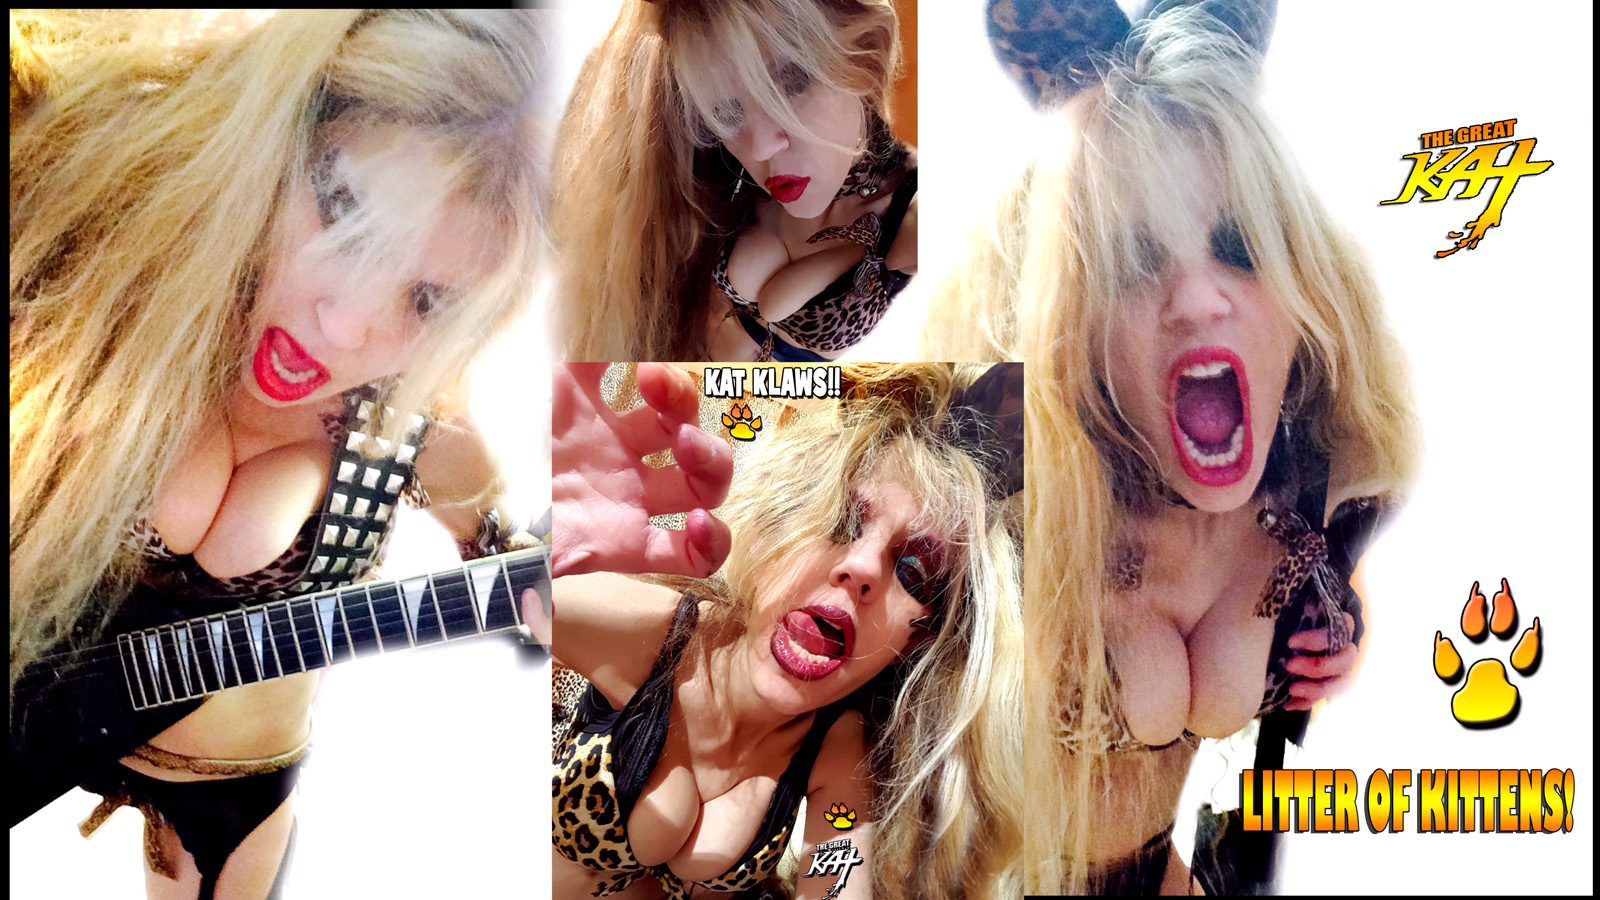 THE GREAT KAT'S "TOP 20 HOT SHRED HOLIDAYS!" LITTER of KITTENS!! From The Great Kat's NEW DVD!!!